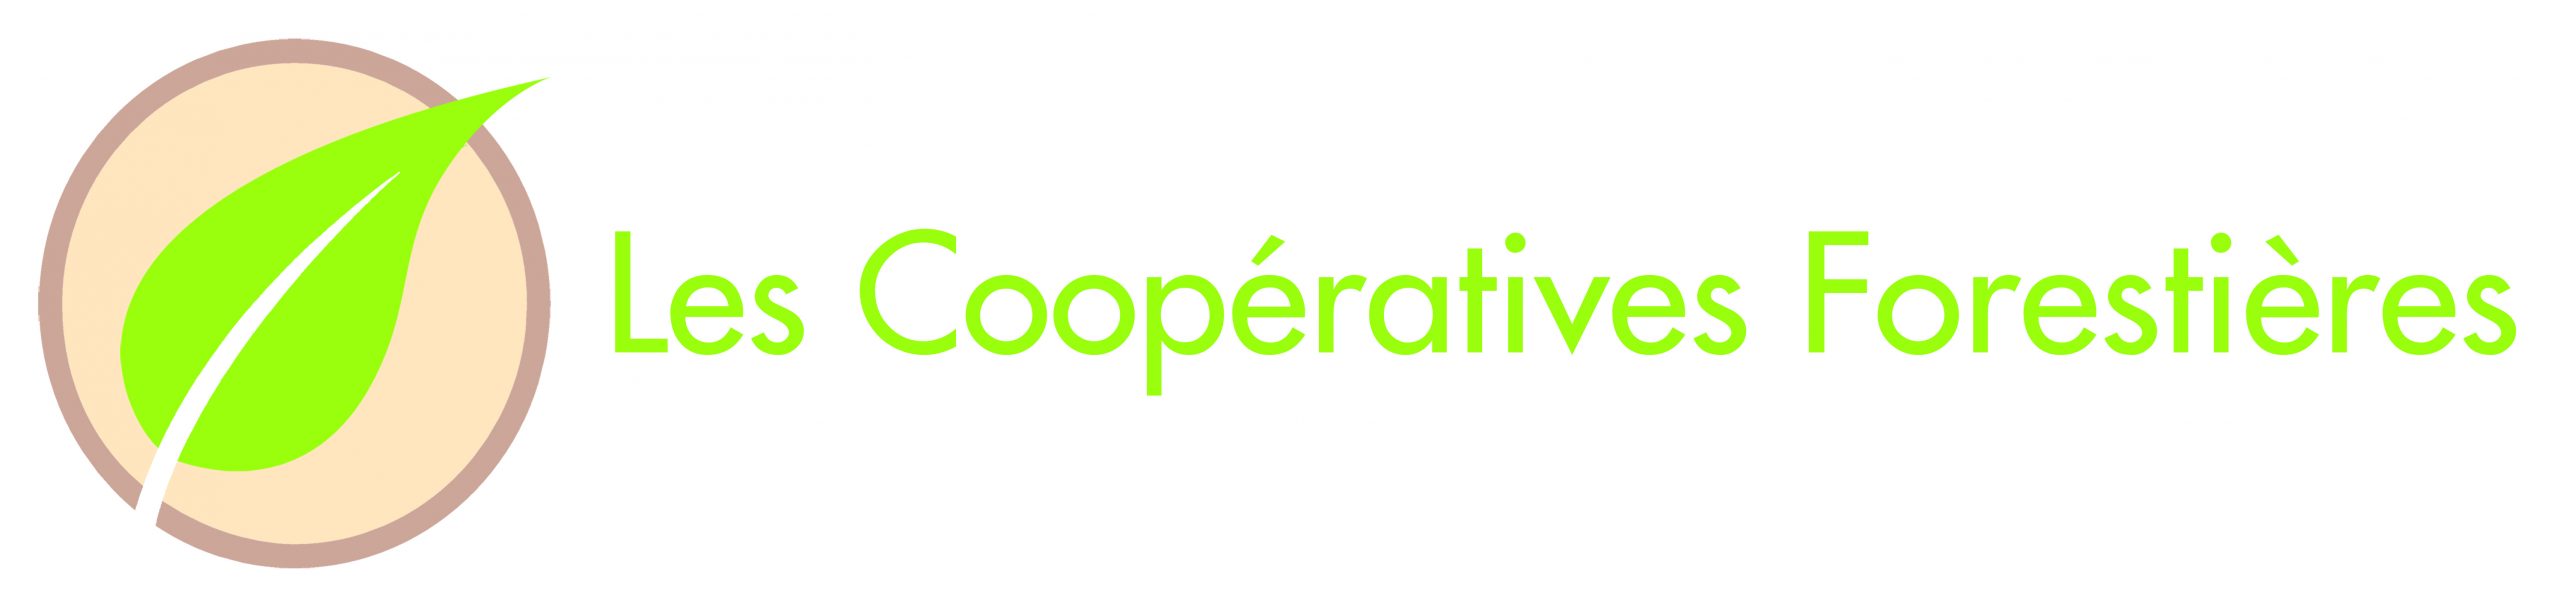 Les Cooperatives Forestieres